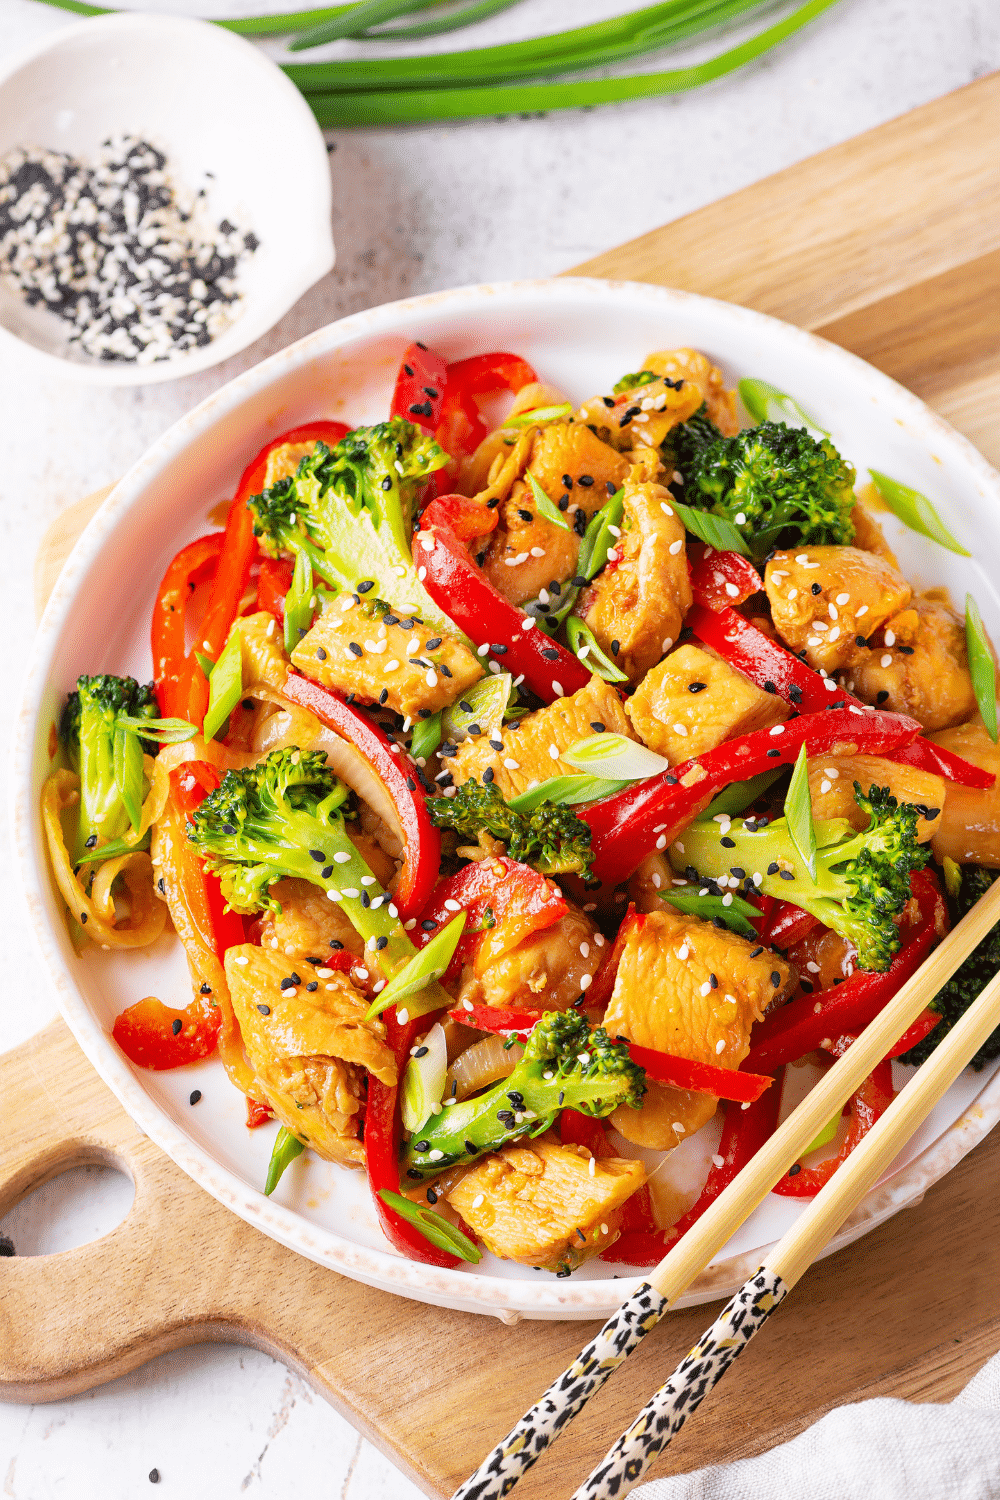 A white bowl filled with stir fry. The bowl has chicken, broccoli, and red peppers in it. The bowl is on a wooden cutting board on a white table.